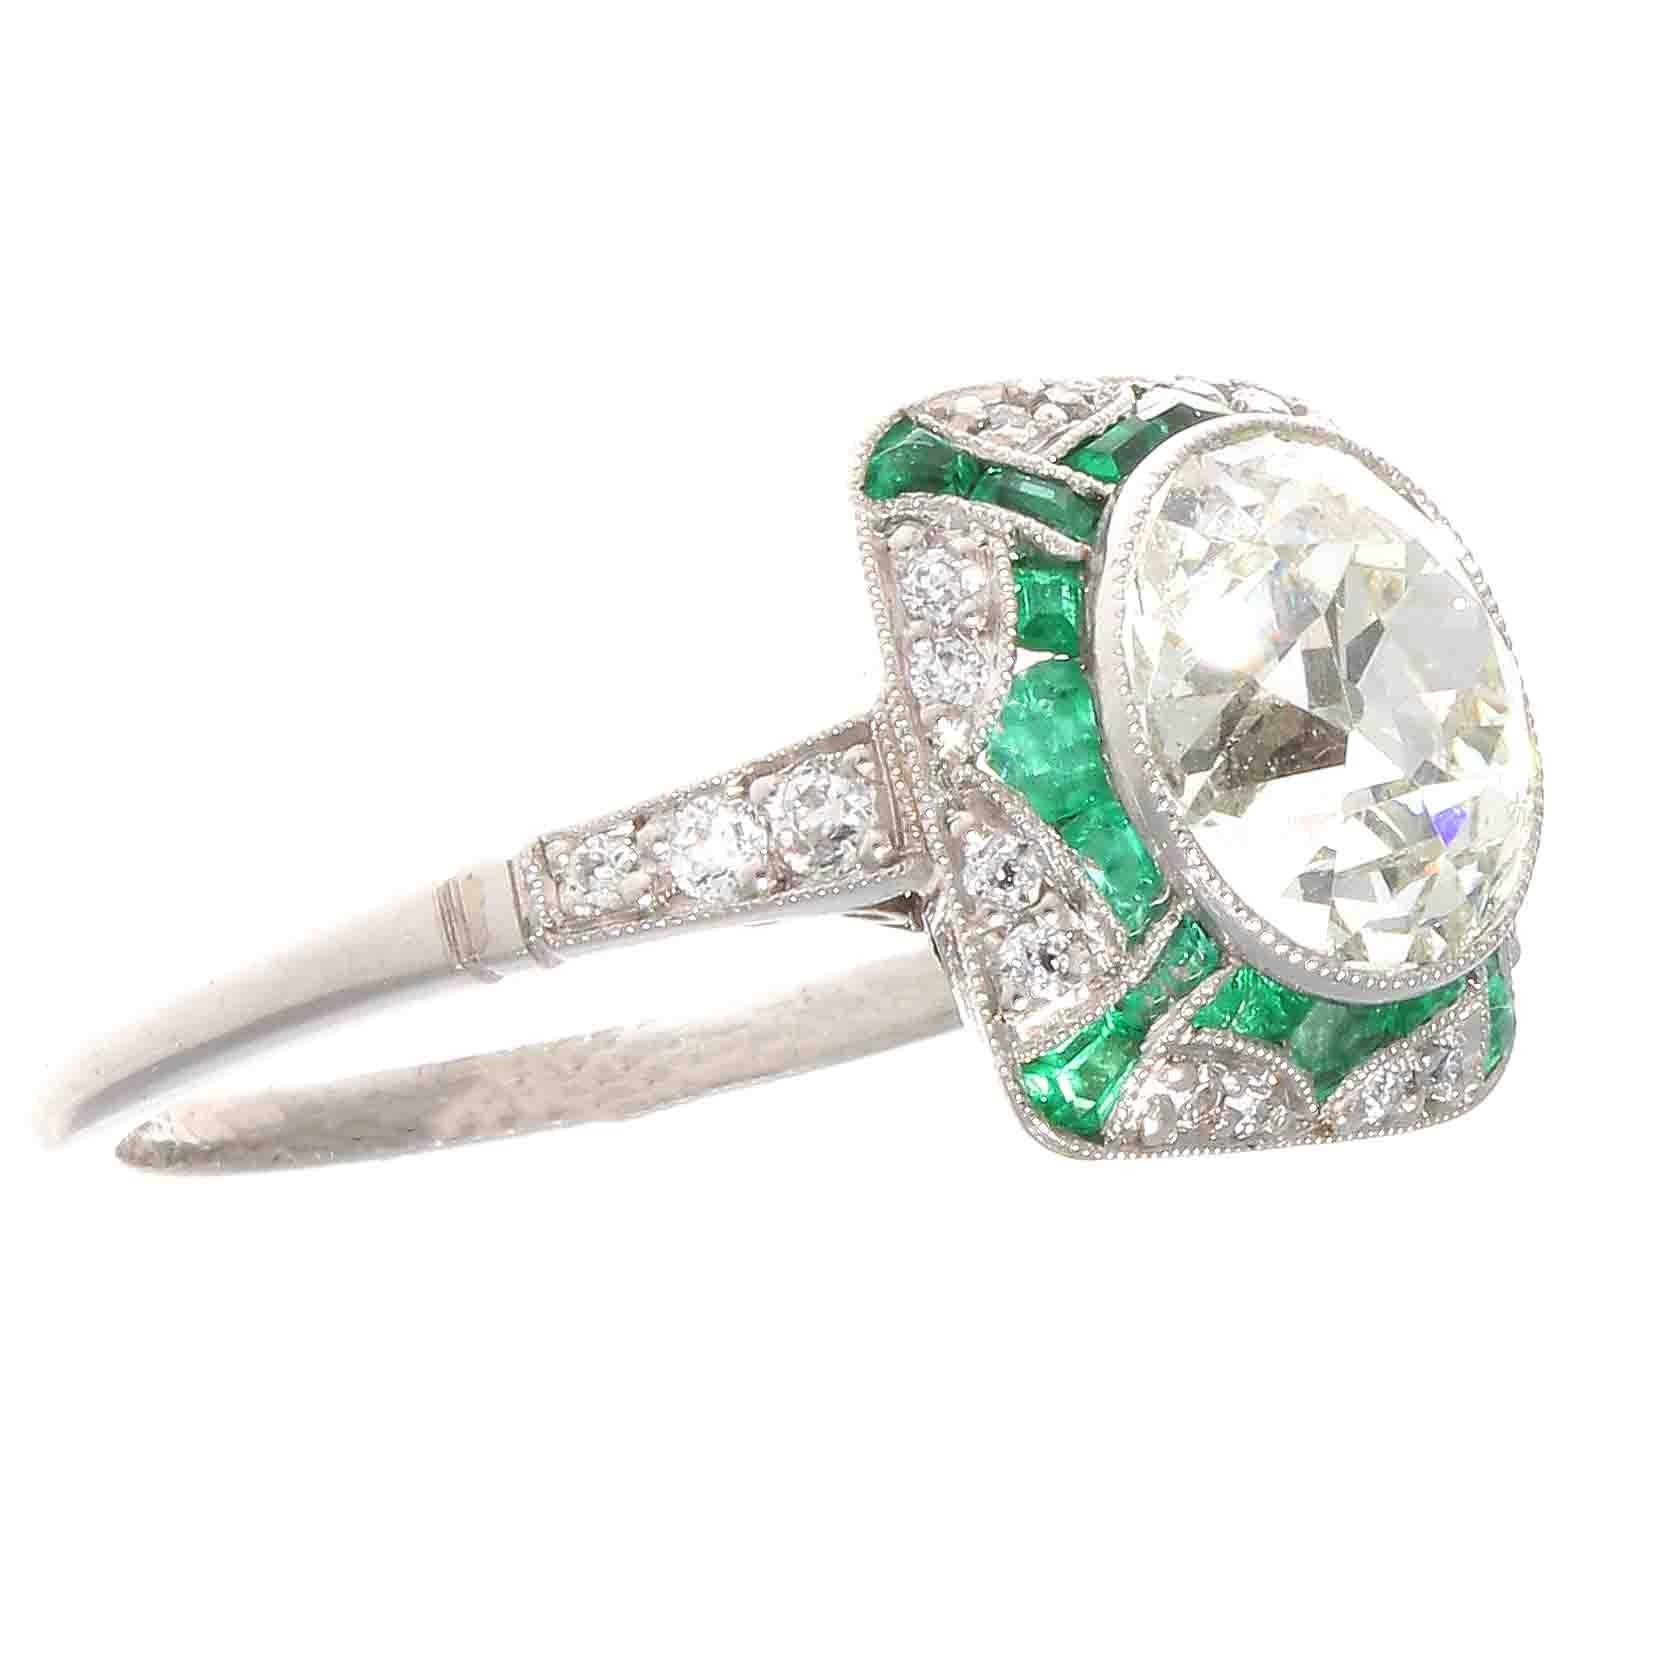 From the golden era of Art Deco jewelry when style and elegance mattered. A time when martinis tasted better and people dressed more fashionably. Featuring a 2.29 carat old European cut diamond that is J color, VS2 clarity. Accented by vibrant green